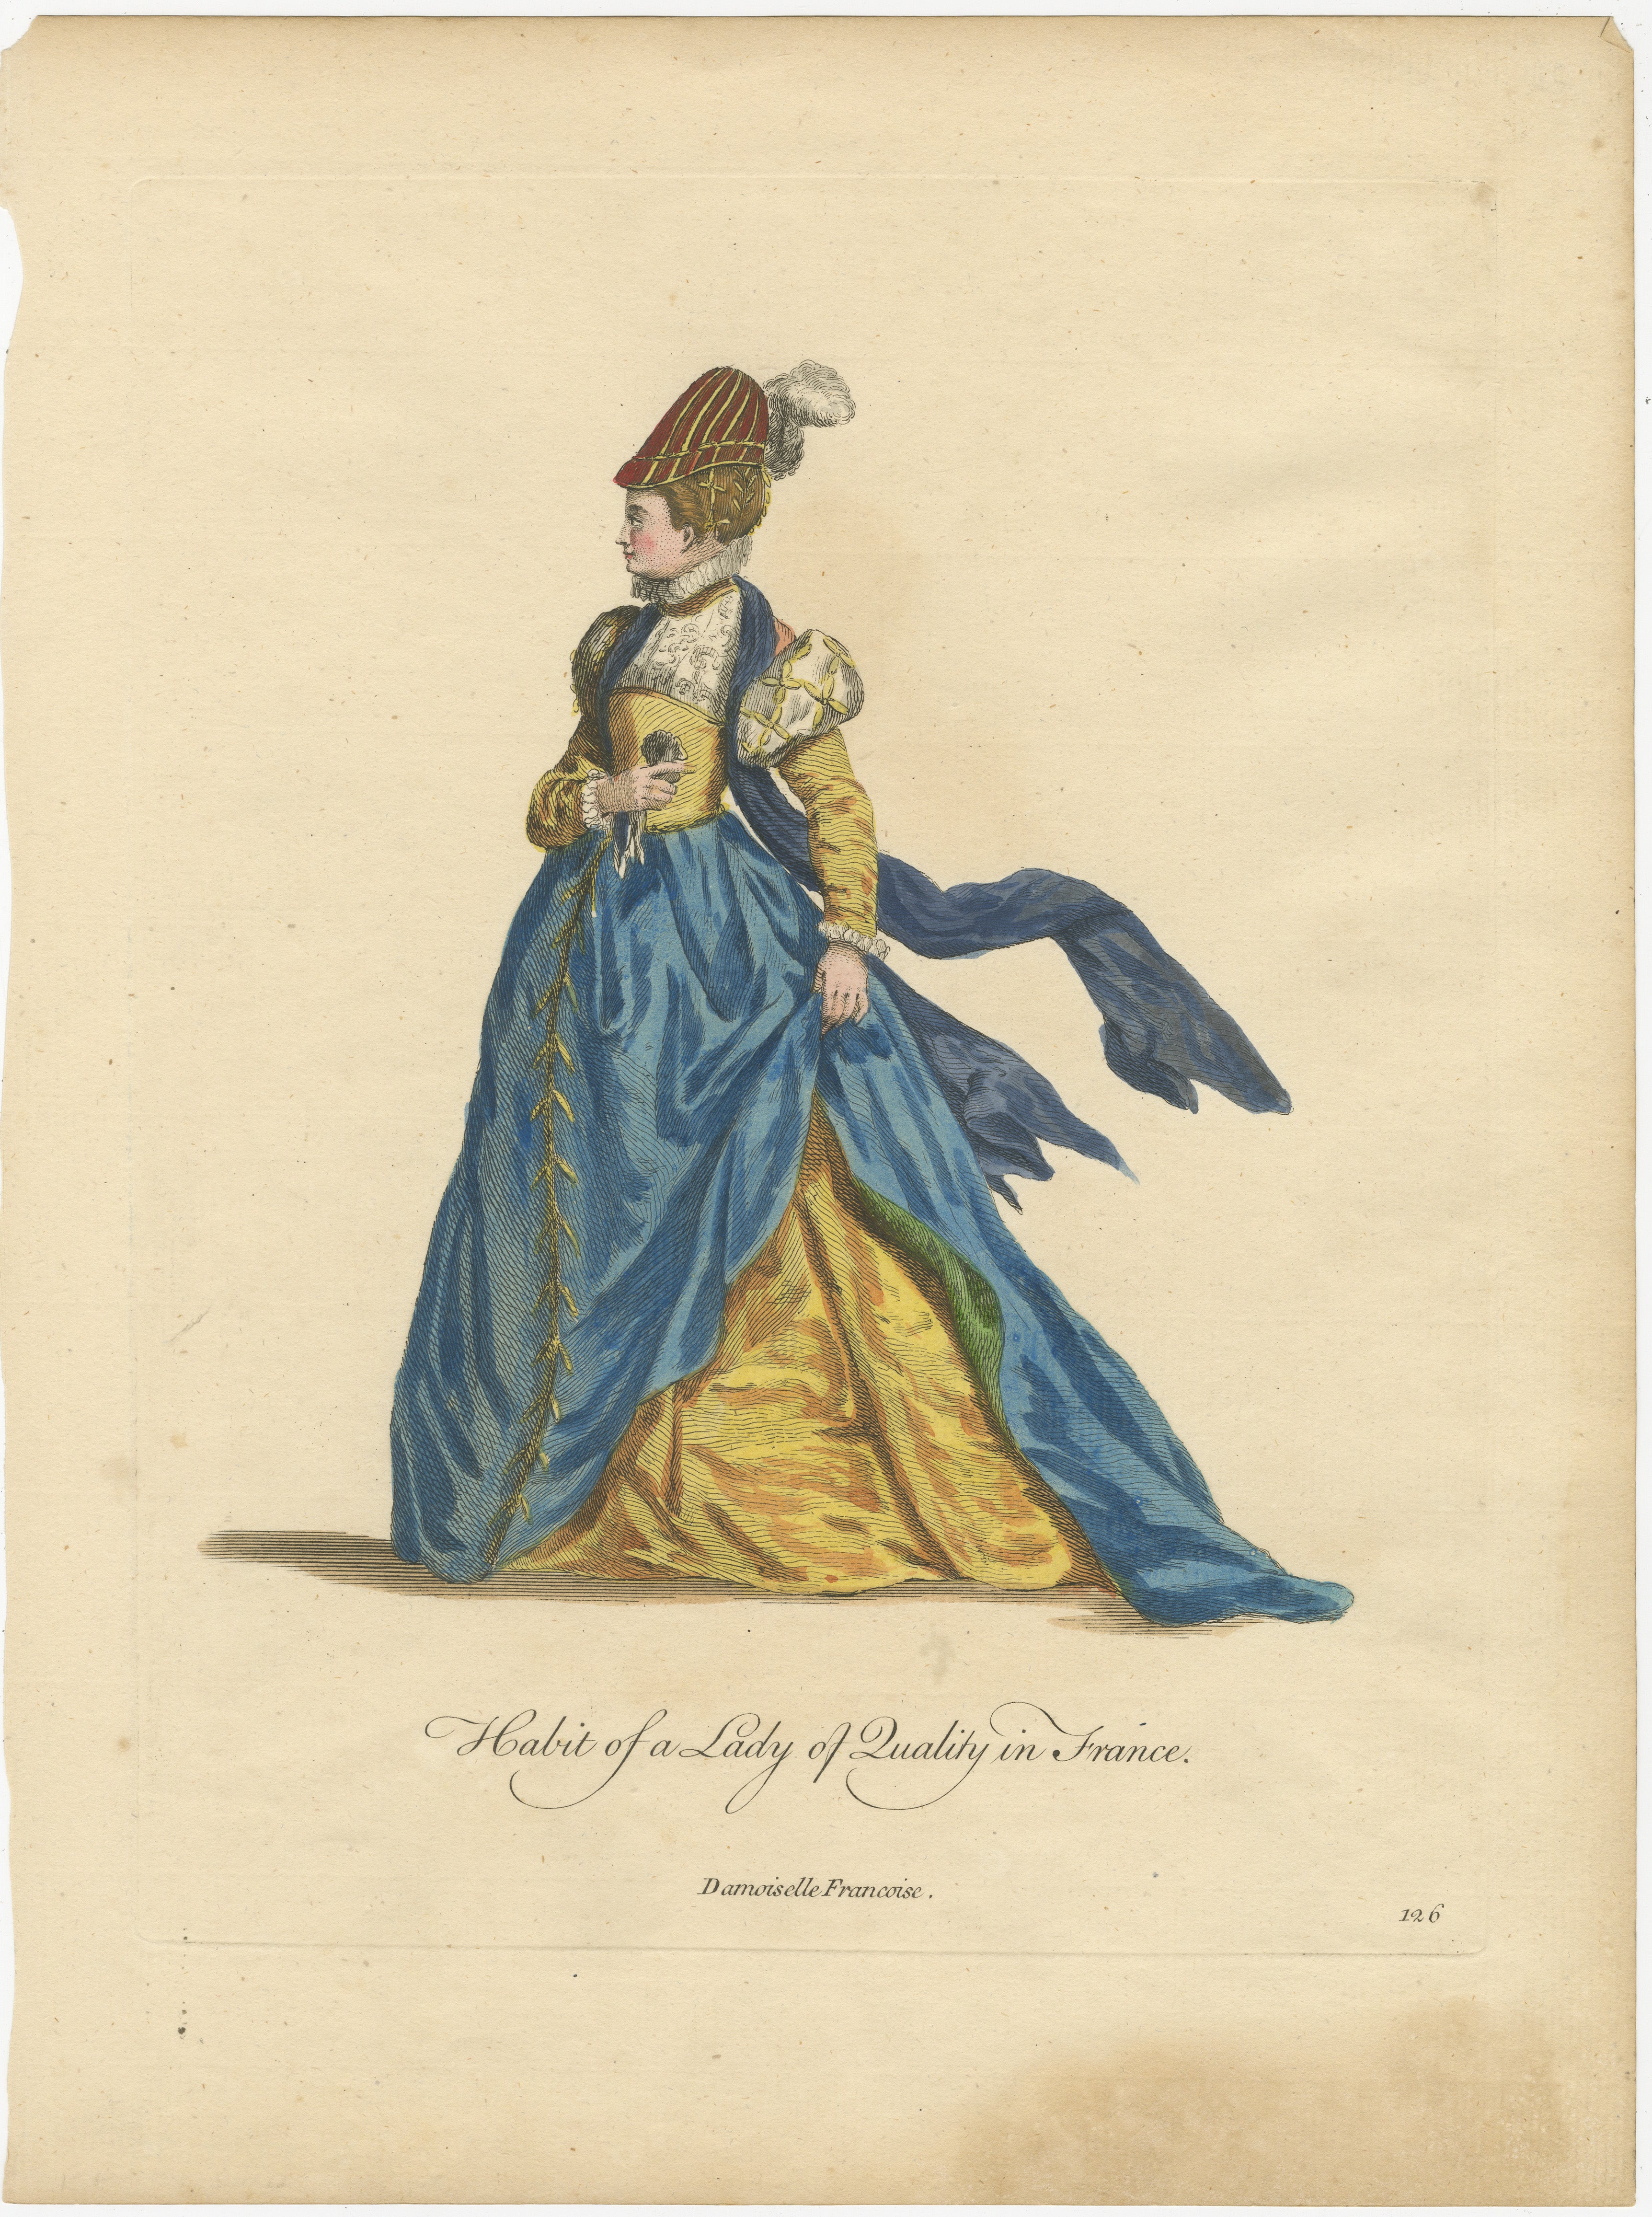 An original antique hand-colored print of a woman in an elaborate dress, which is described as the 